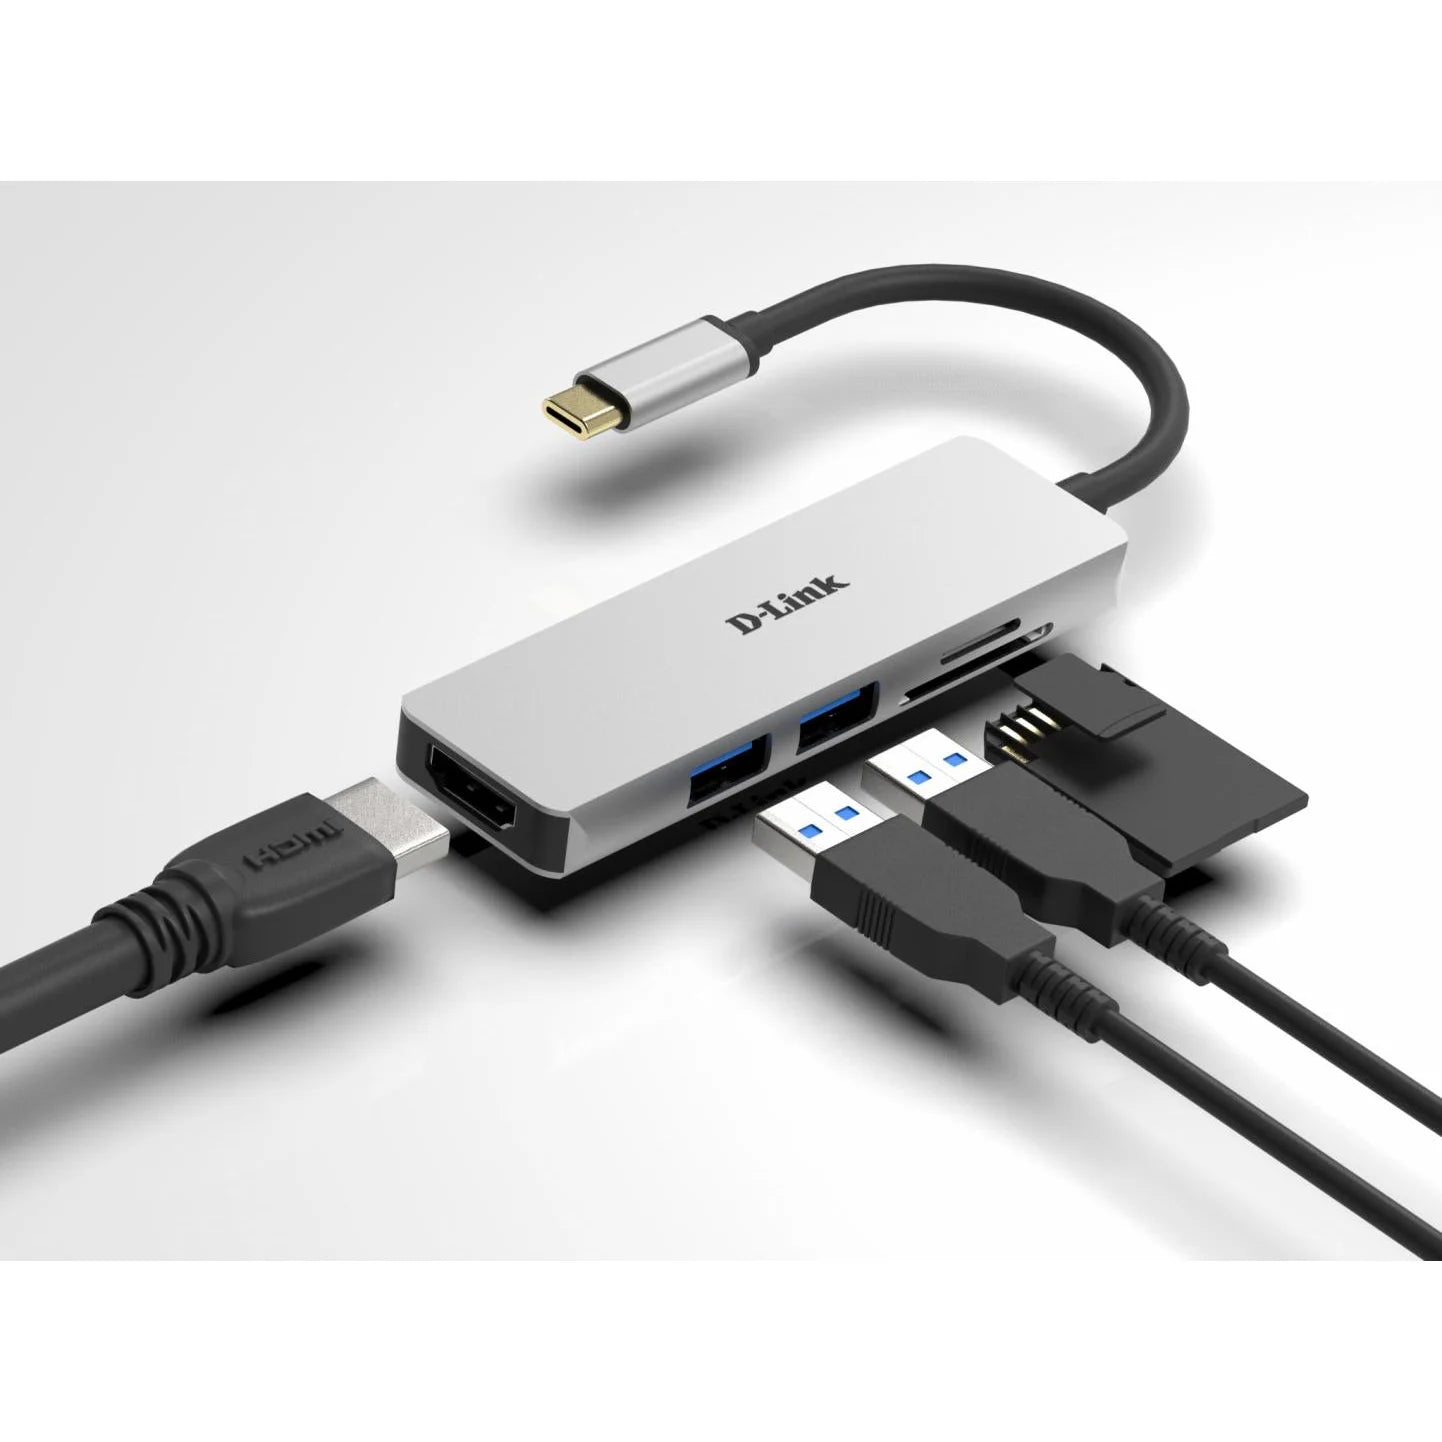 D-Link DUB-M530 5-in-1 USB-C Hub with HDMI and SD/microSD card reader, DUB-M530,1* USB-C connector with USB cable 11.5 cm, 1* HDMI Port, 2* USB Type-APort (USB 3.0), 1* SD card slot, 1* microSD card slot, Weight: 42g.-Dexter Computer